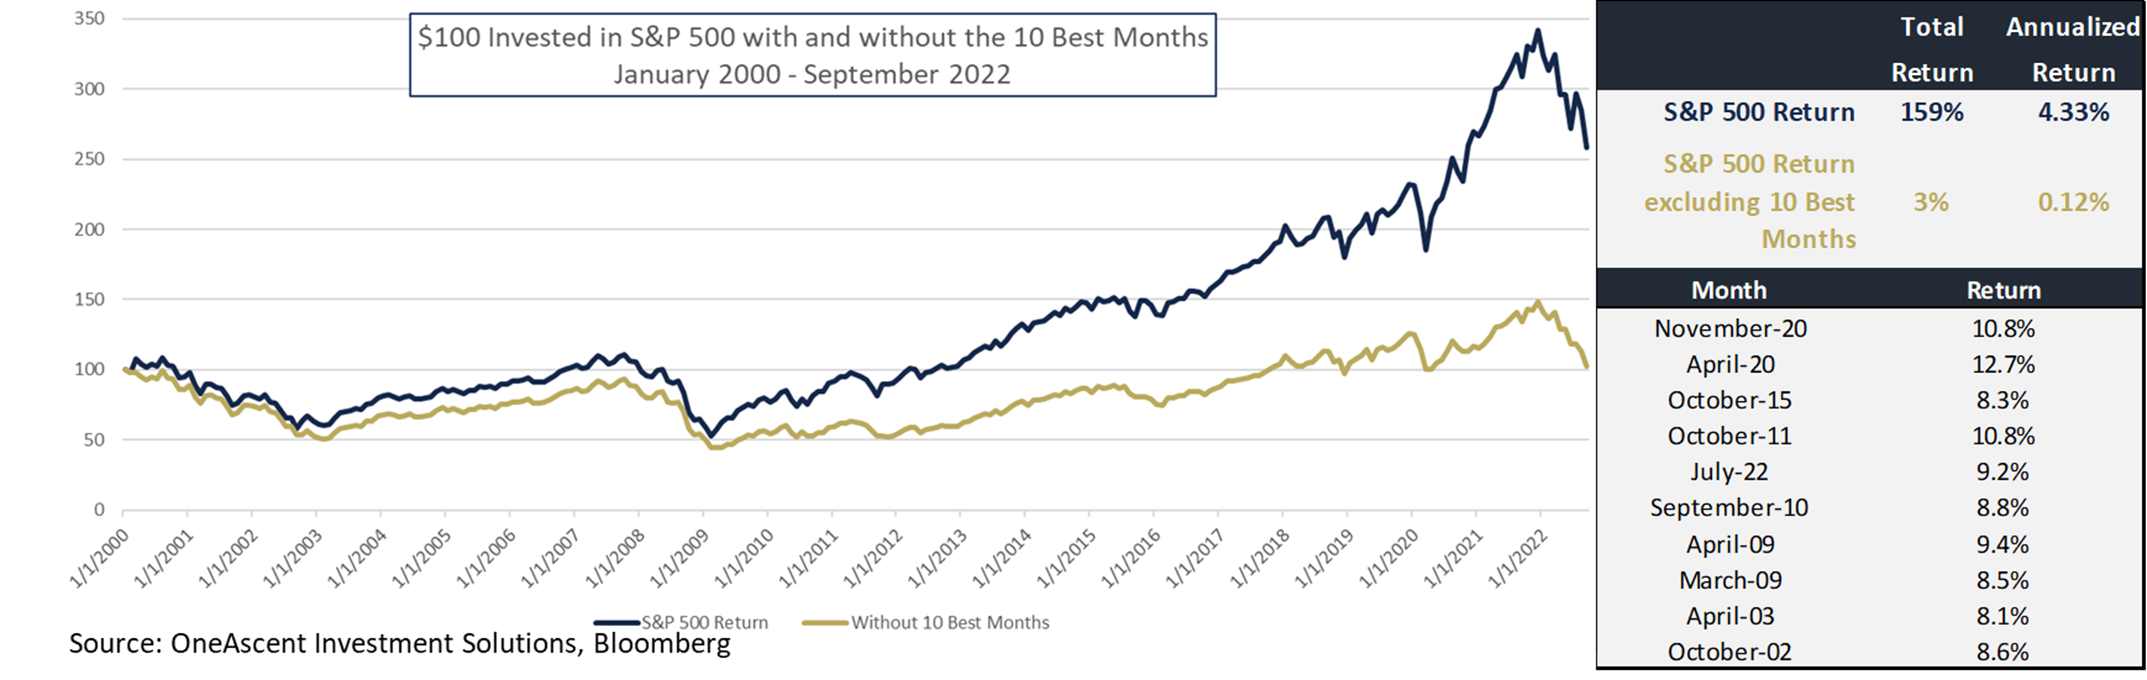 $100 Invested in S&P 500 with and without the 10 Best Months January 2000 - September 2022